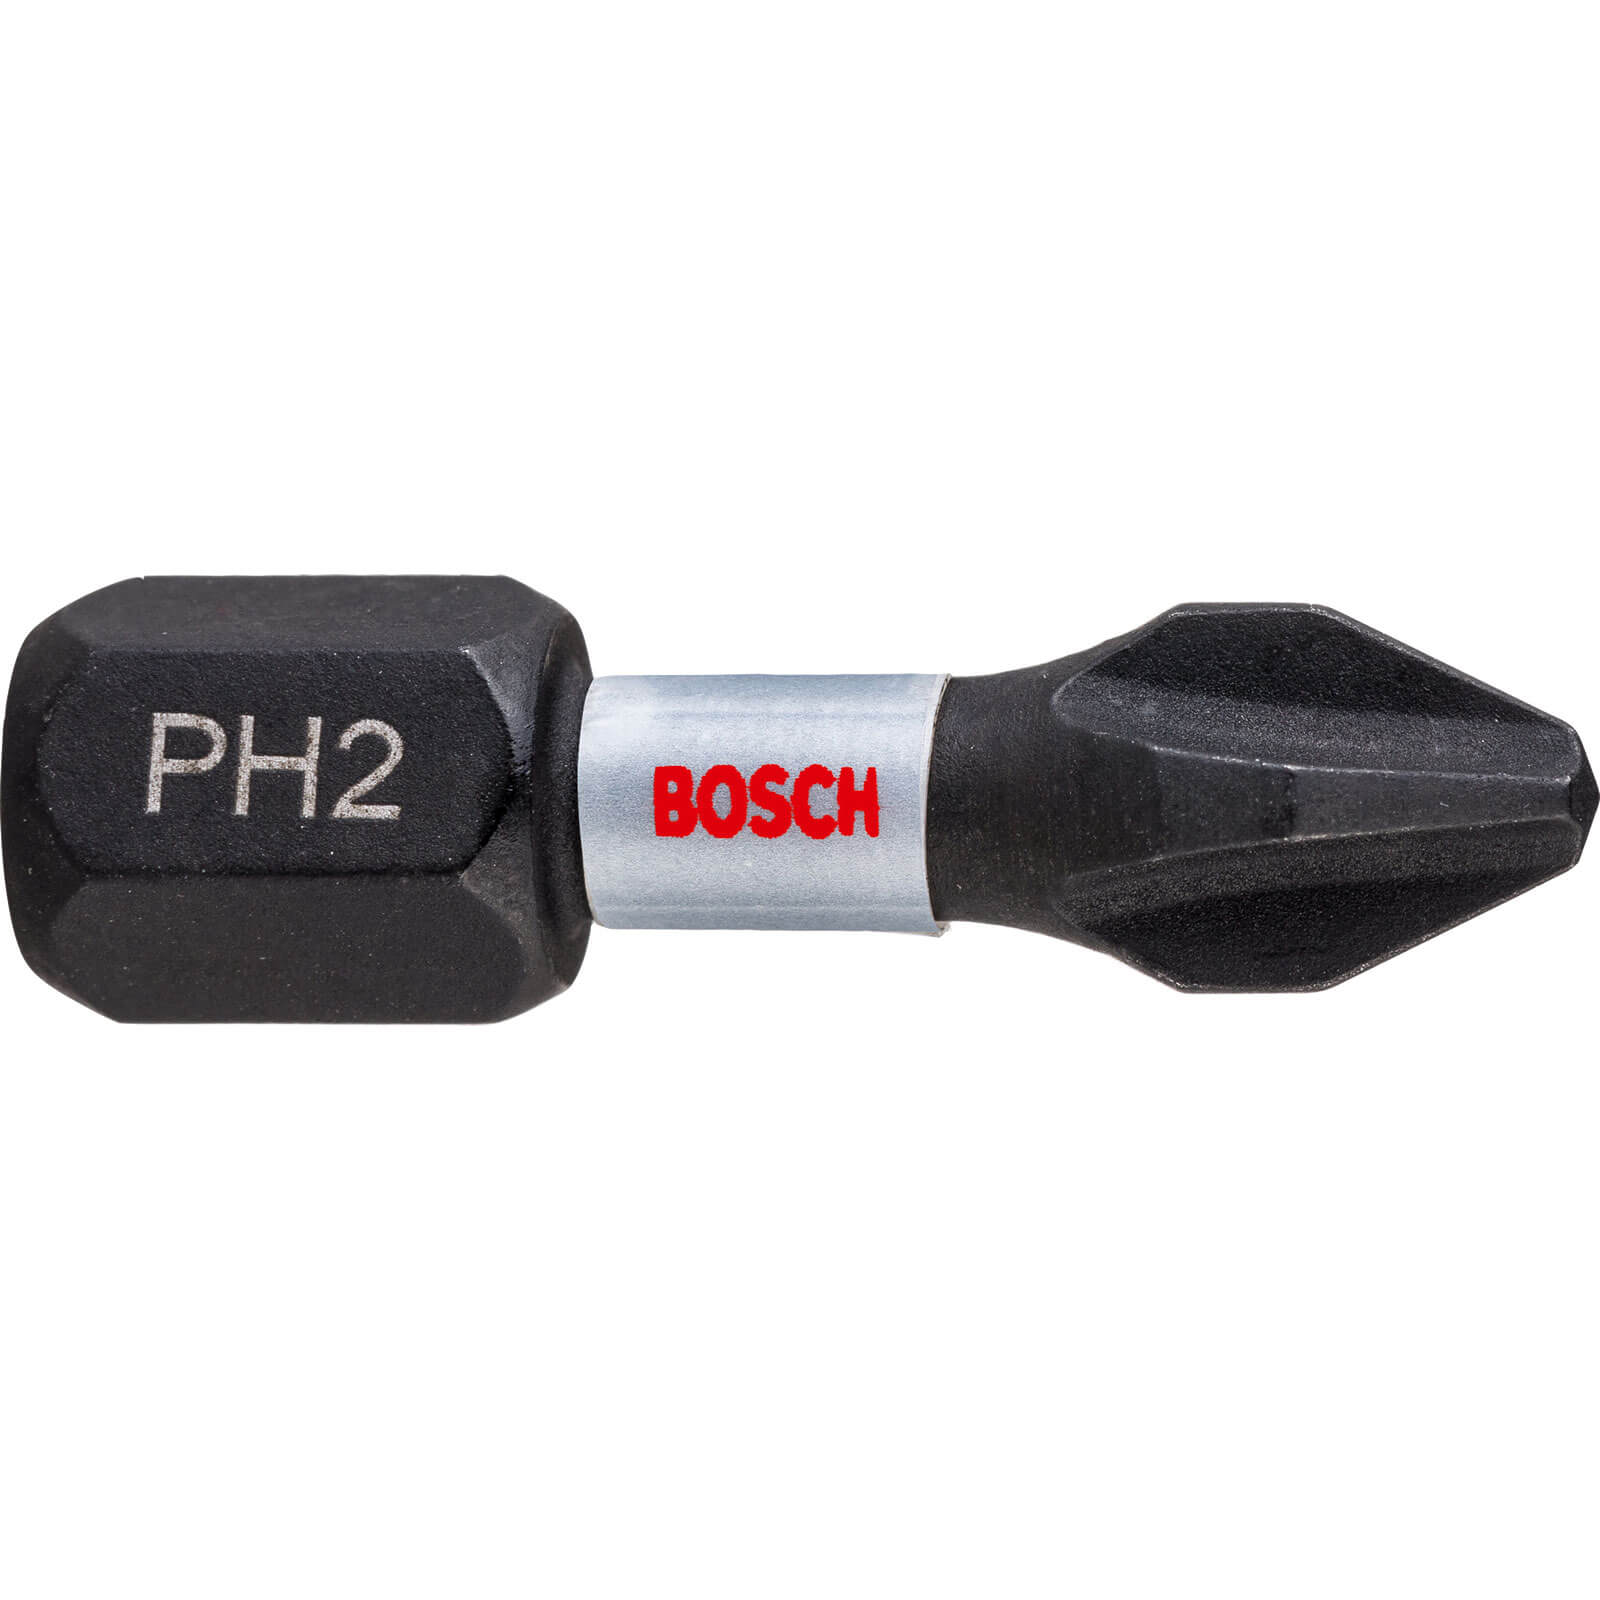 Image of Bosch Impact Control Torsion Phillips Screwdriver Bits PH2 25mm Pack of 2